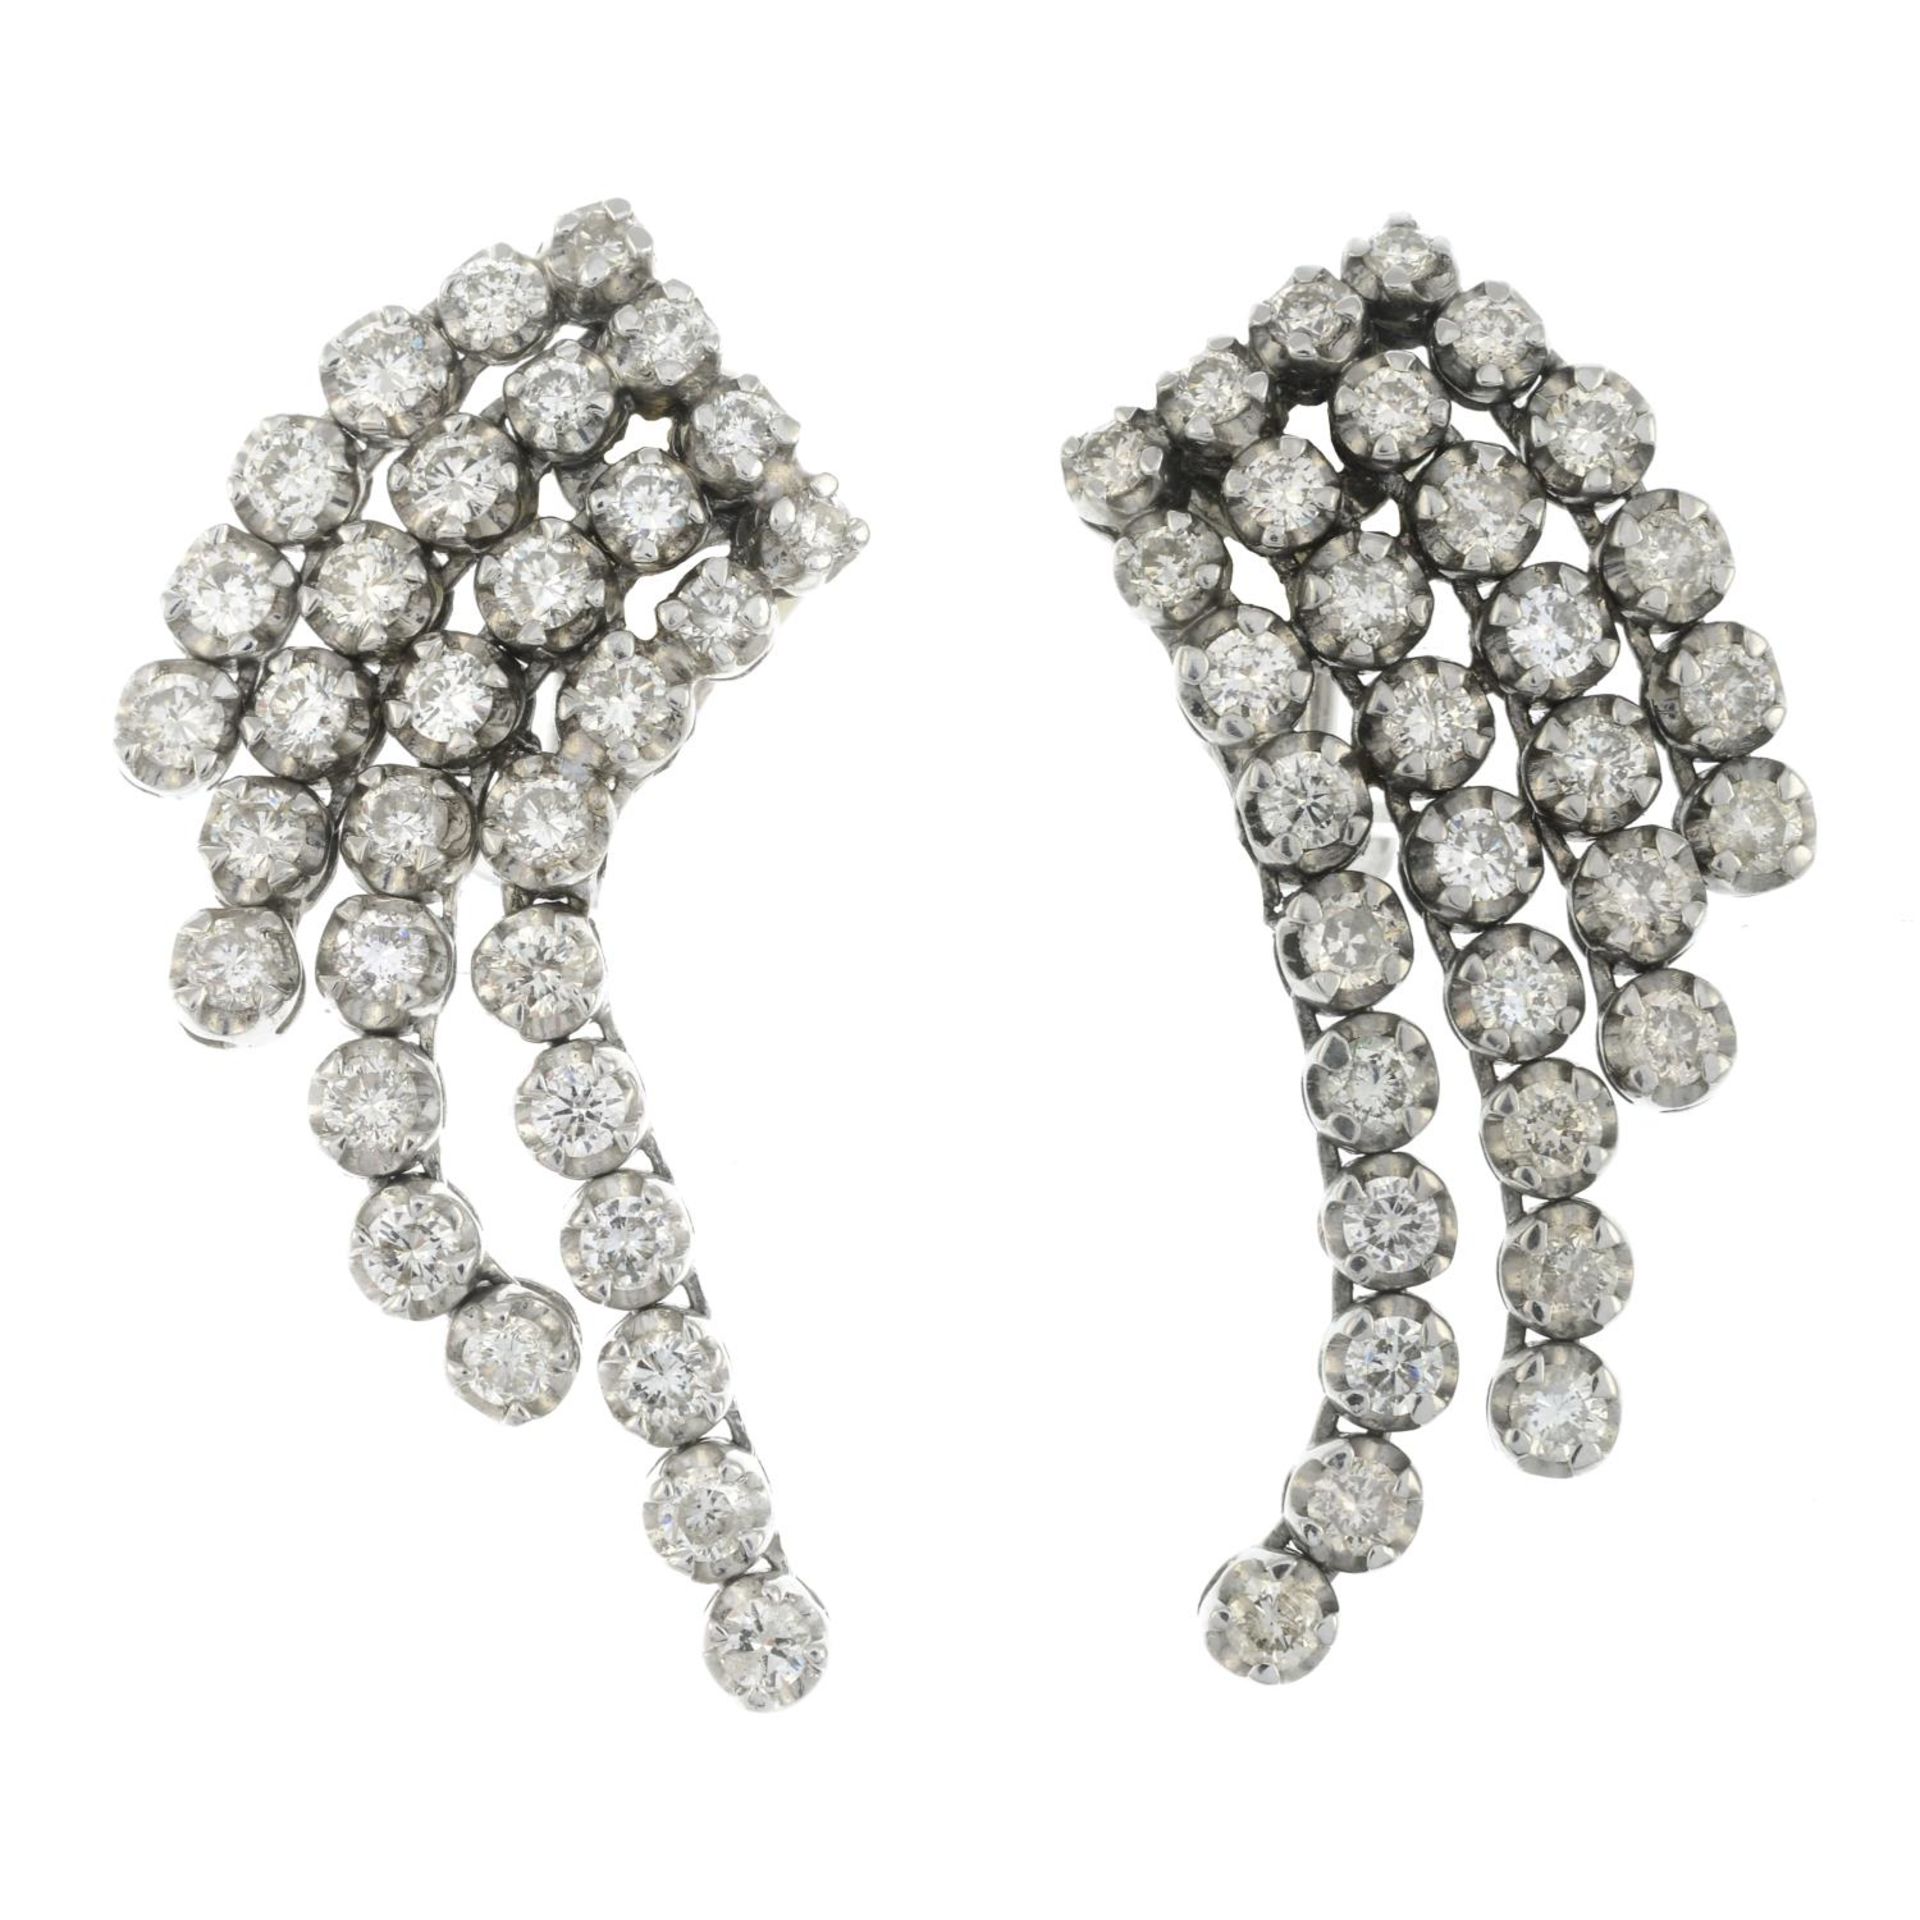 A pair of brilliant-cut diamond earrings.Total diamond weight 3.10cts,